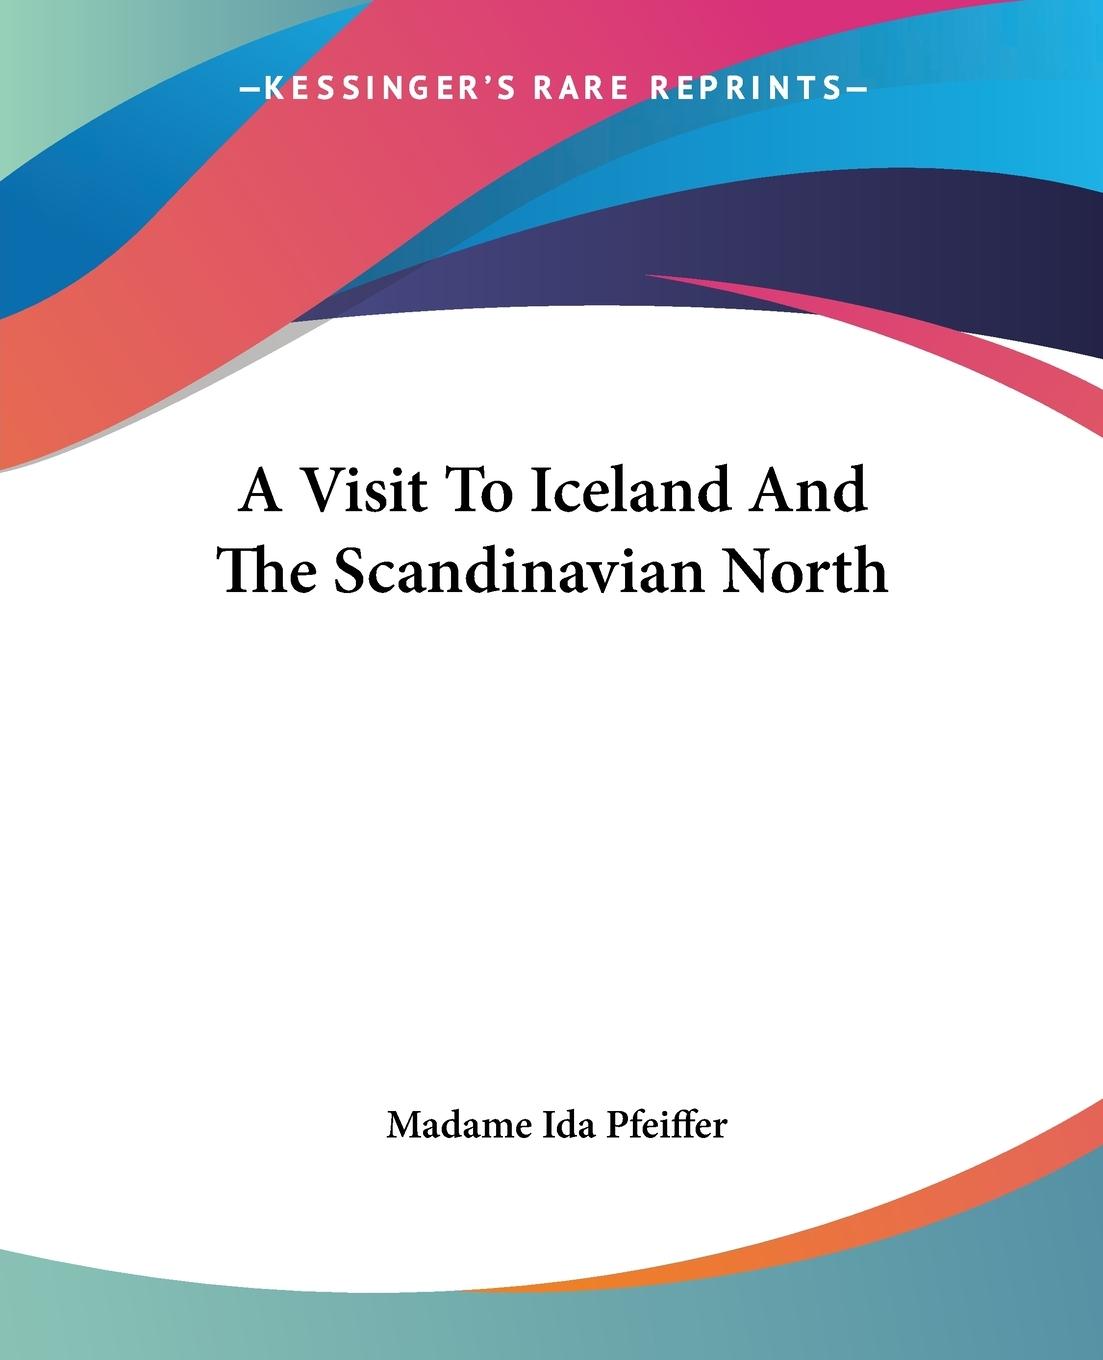 A Visit To Iceland And The Scandinavian North - Pfeiffer, Madame Ida